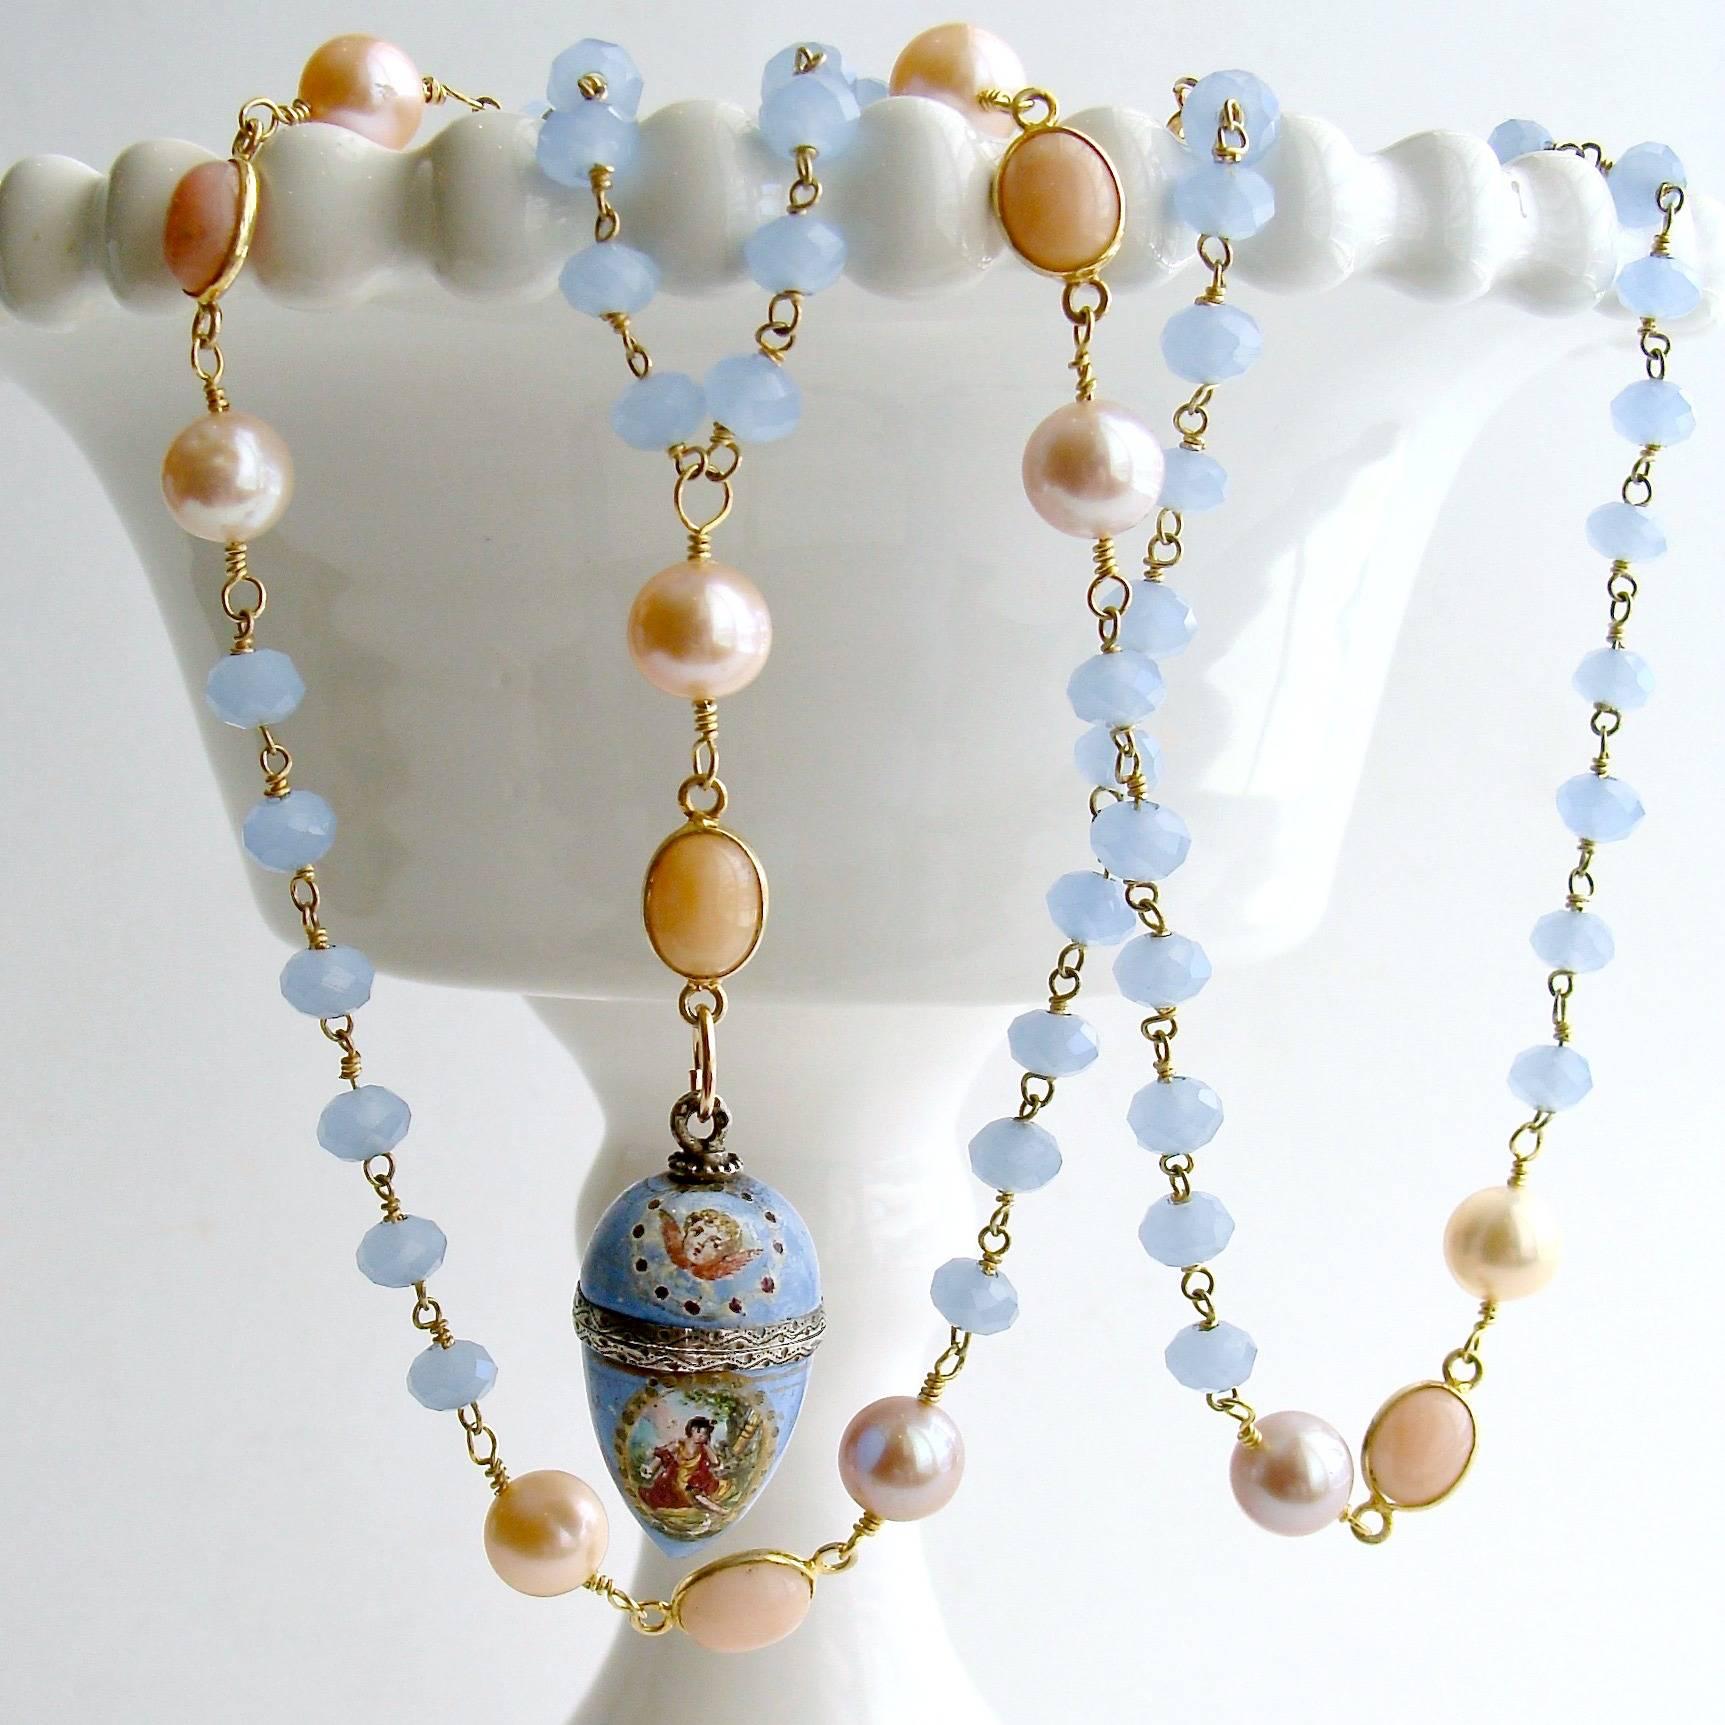 Brezza Dolce IV Necklace.

Delicate powder blue hand-linked chalcedony chain is periodically intercepted with stations of creamy pearls flanking gold vermeil Peruvian pink opal connectors to create a gorgeous backdrop for a most charming antique